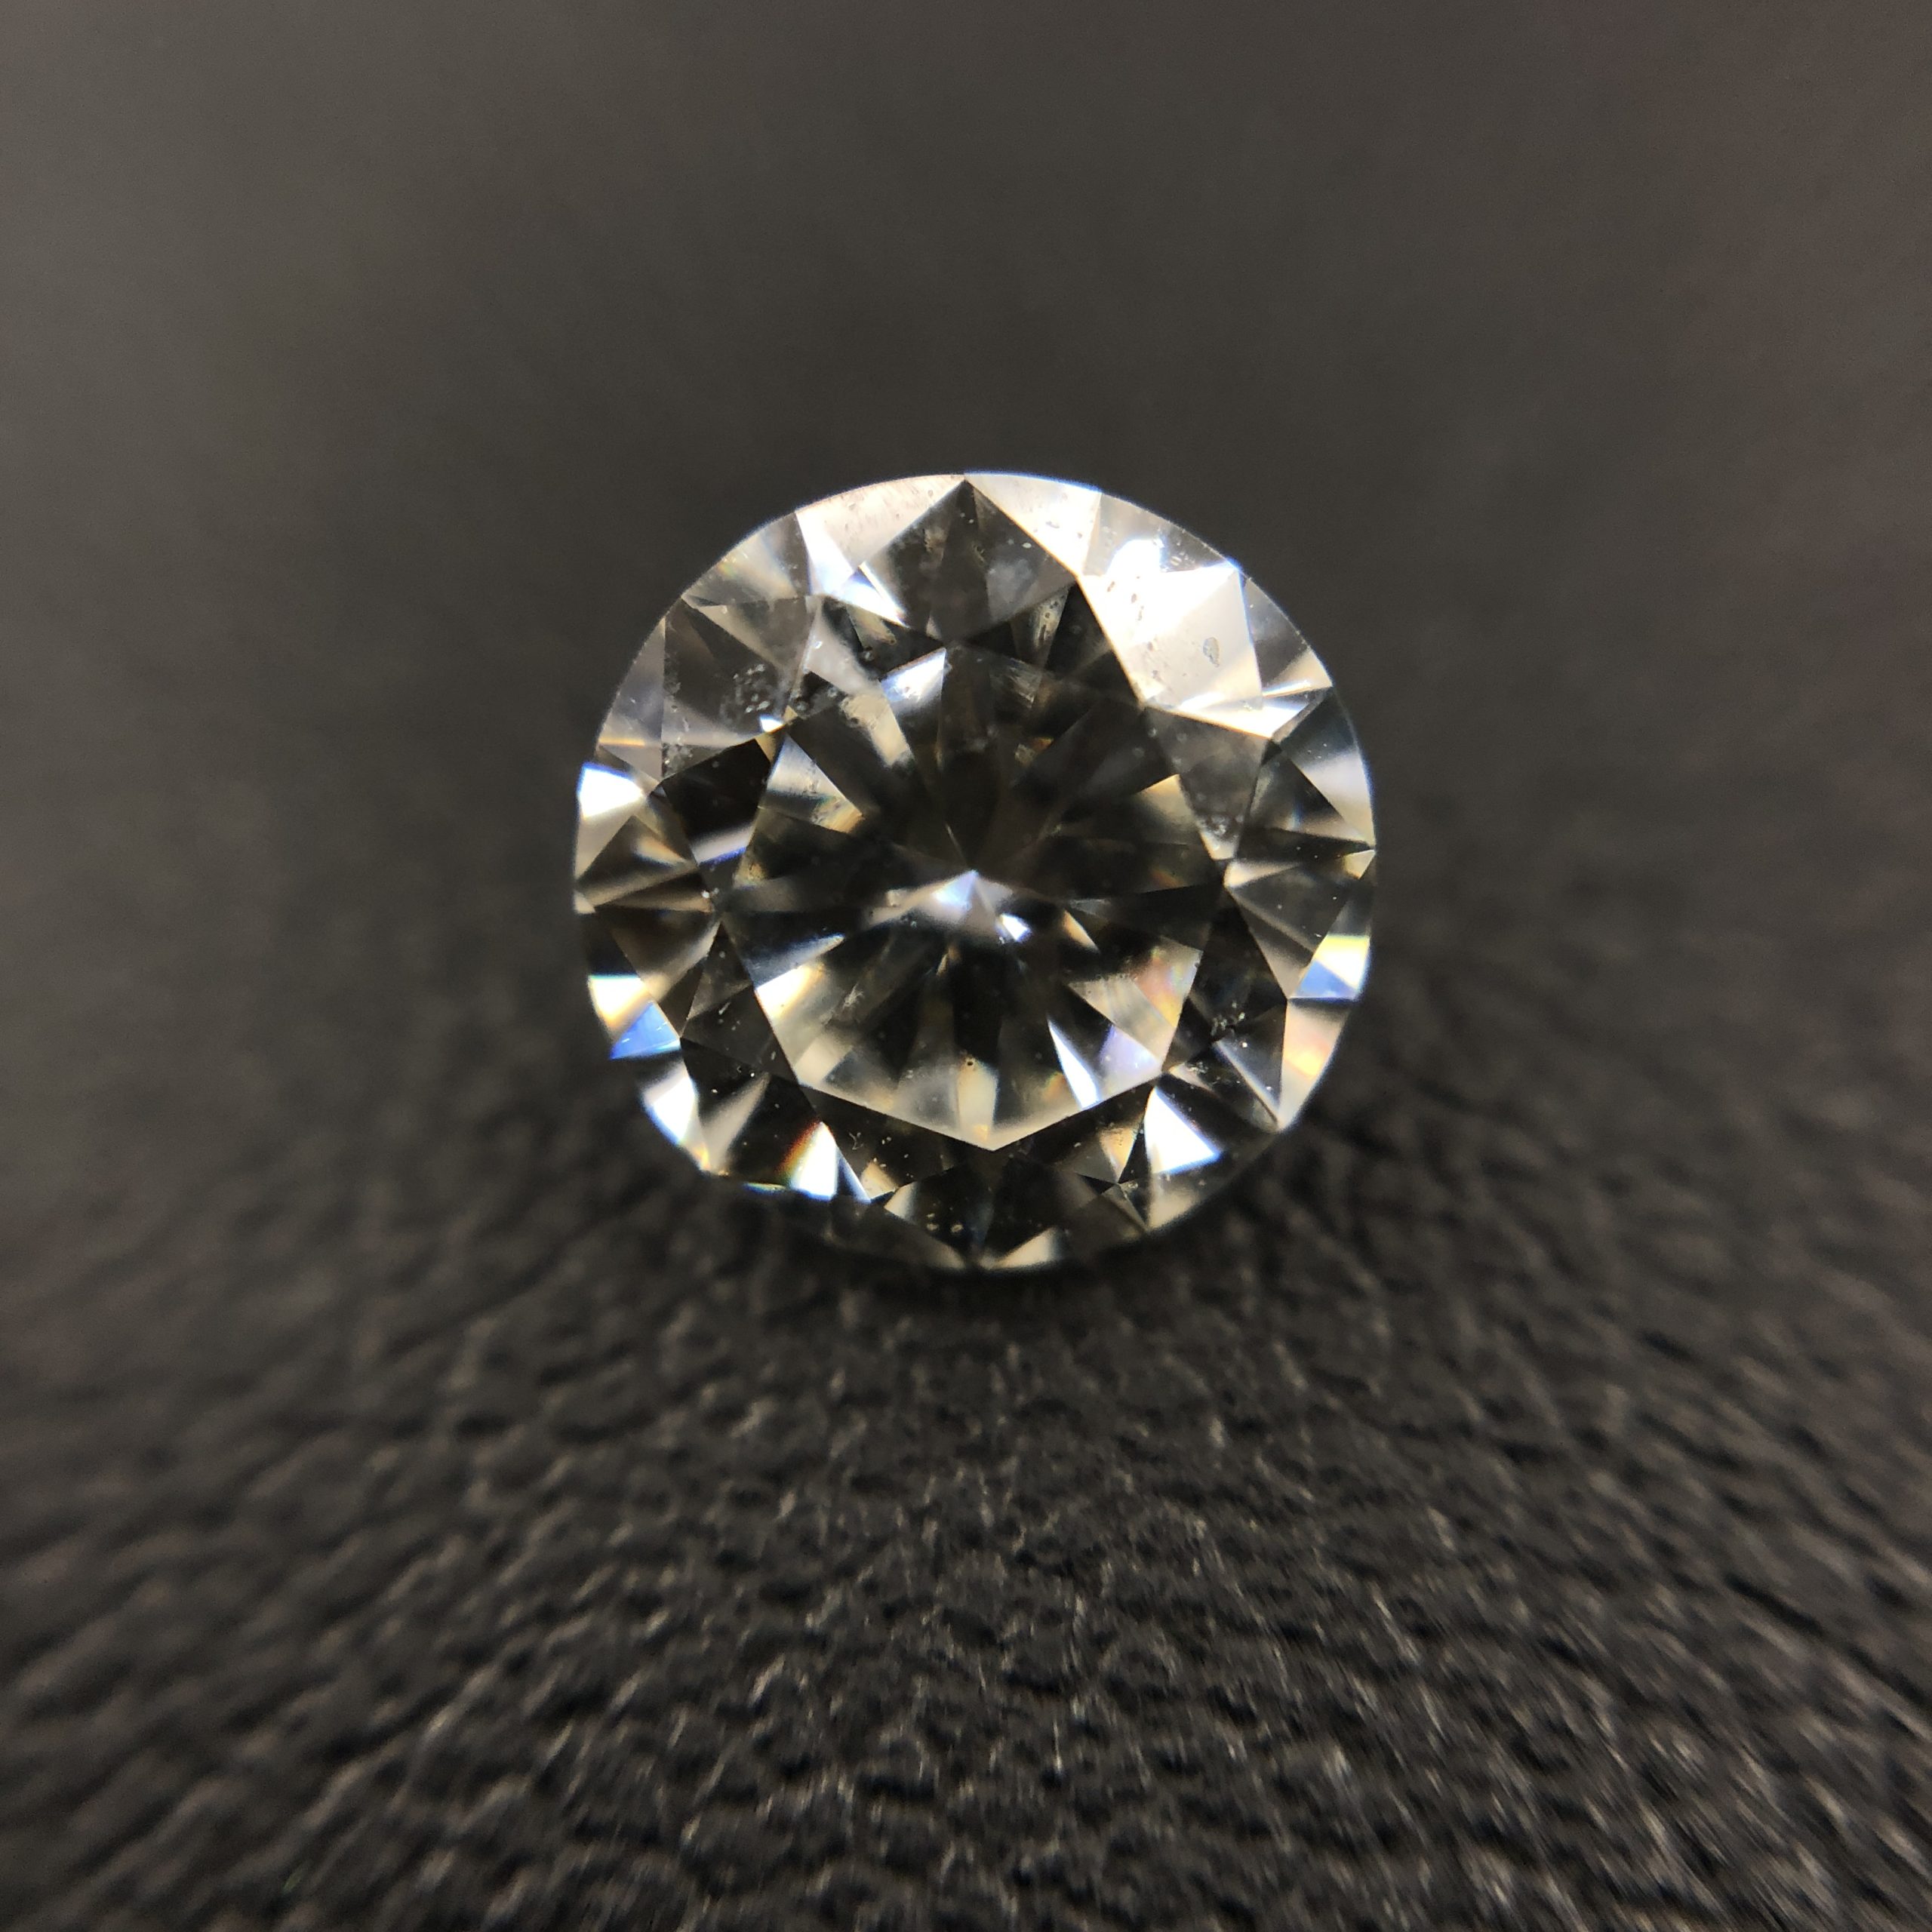 You are currently viewing D 1.024ct J/VS-2/VG